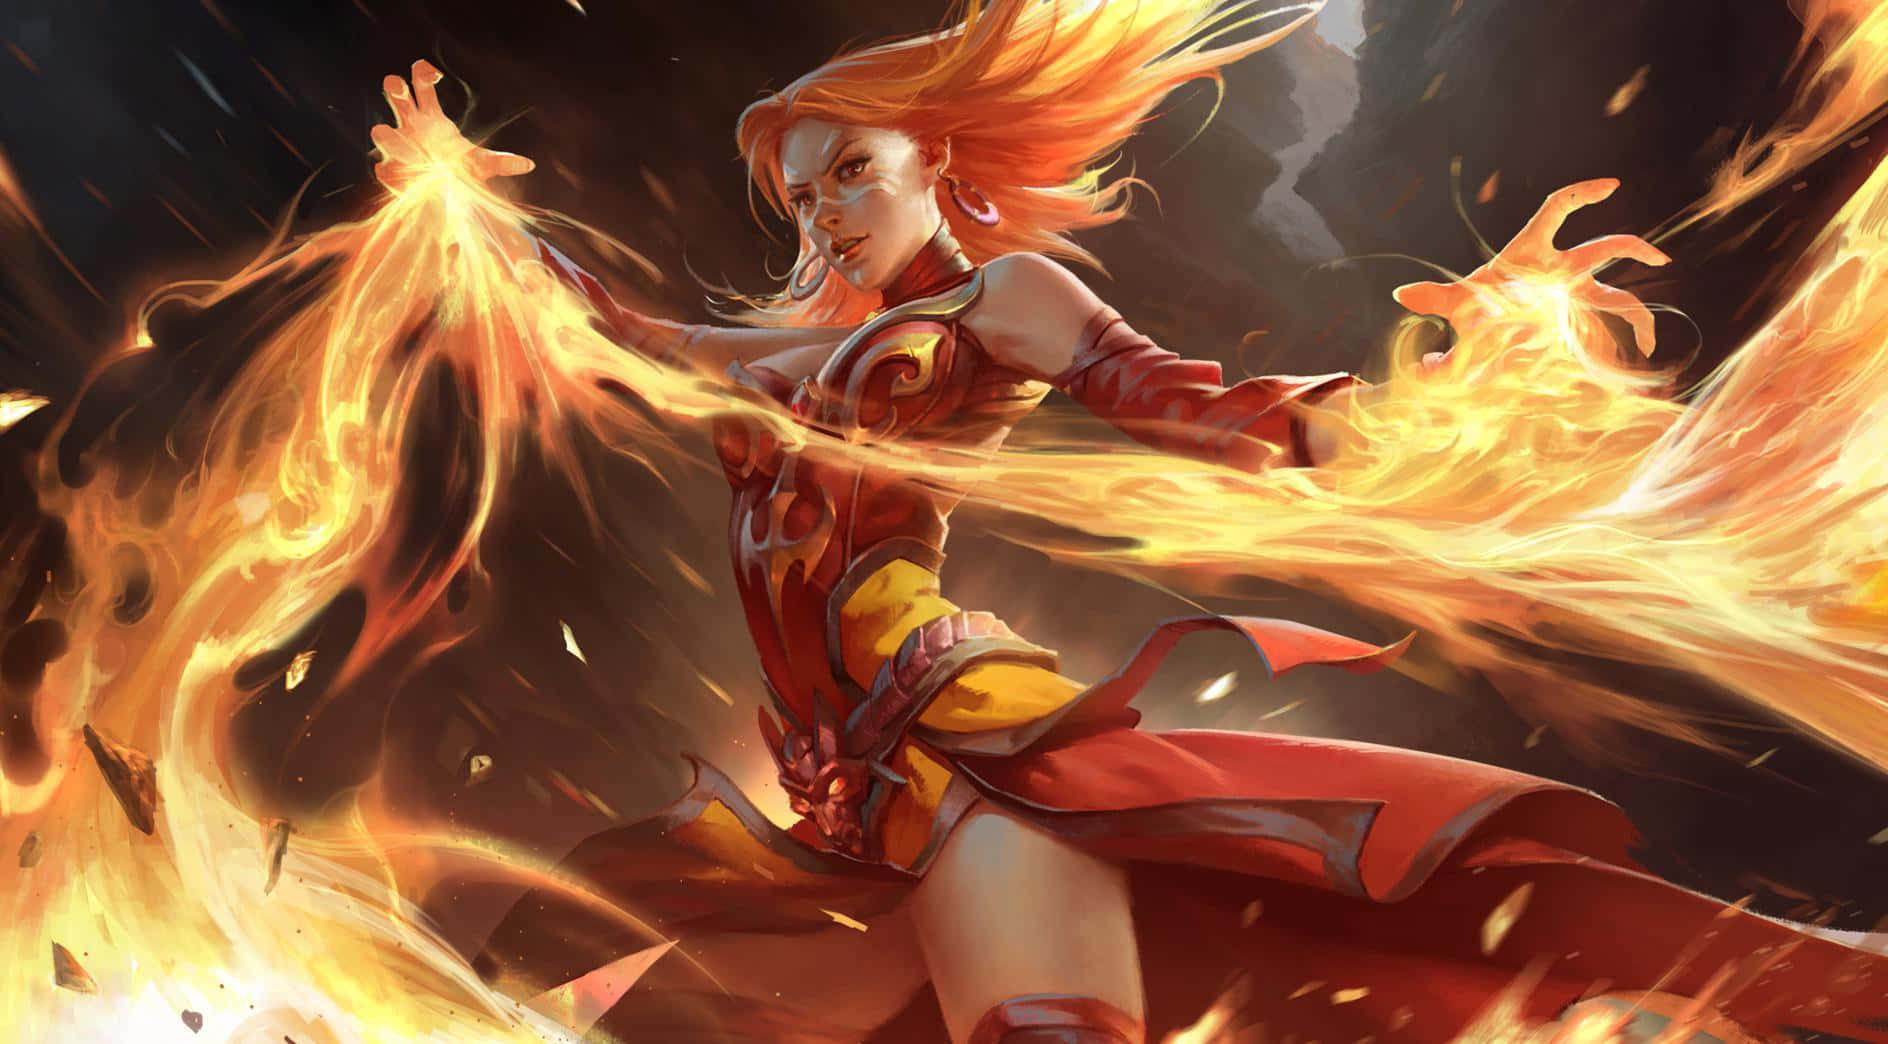 Lina, the fiery heroine, in action on Dota 2 Wallpaper